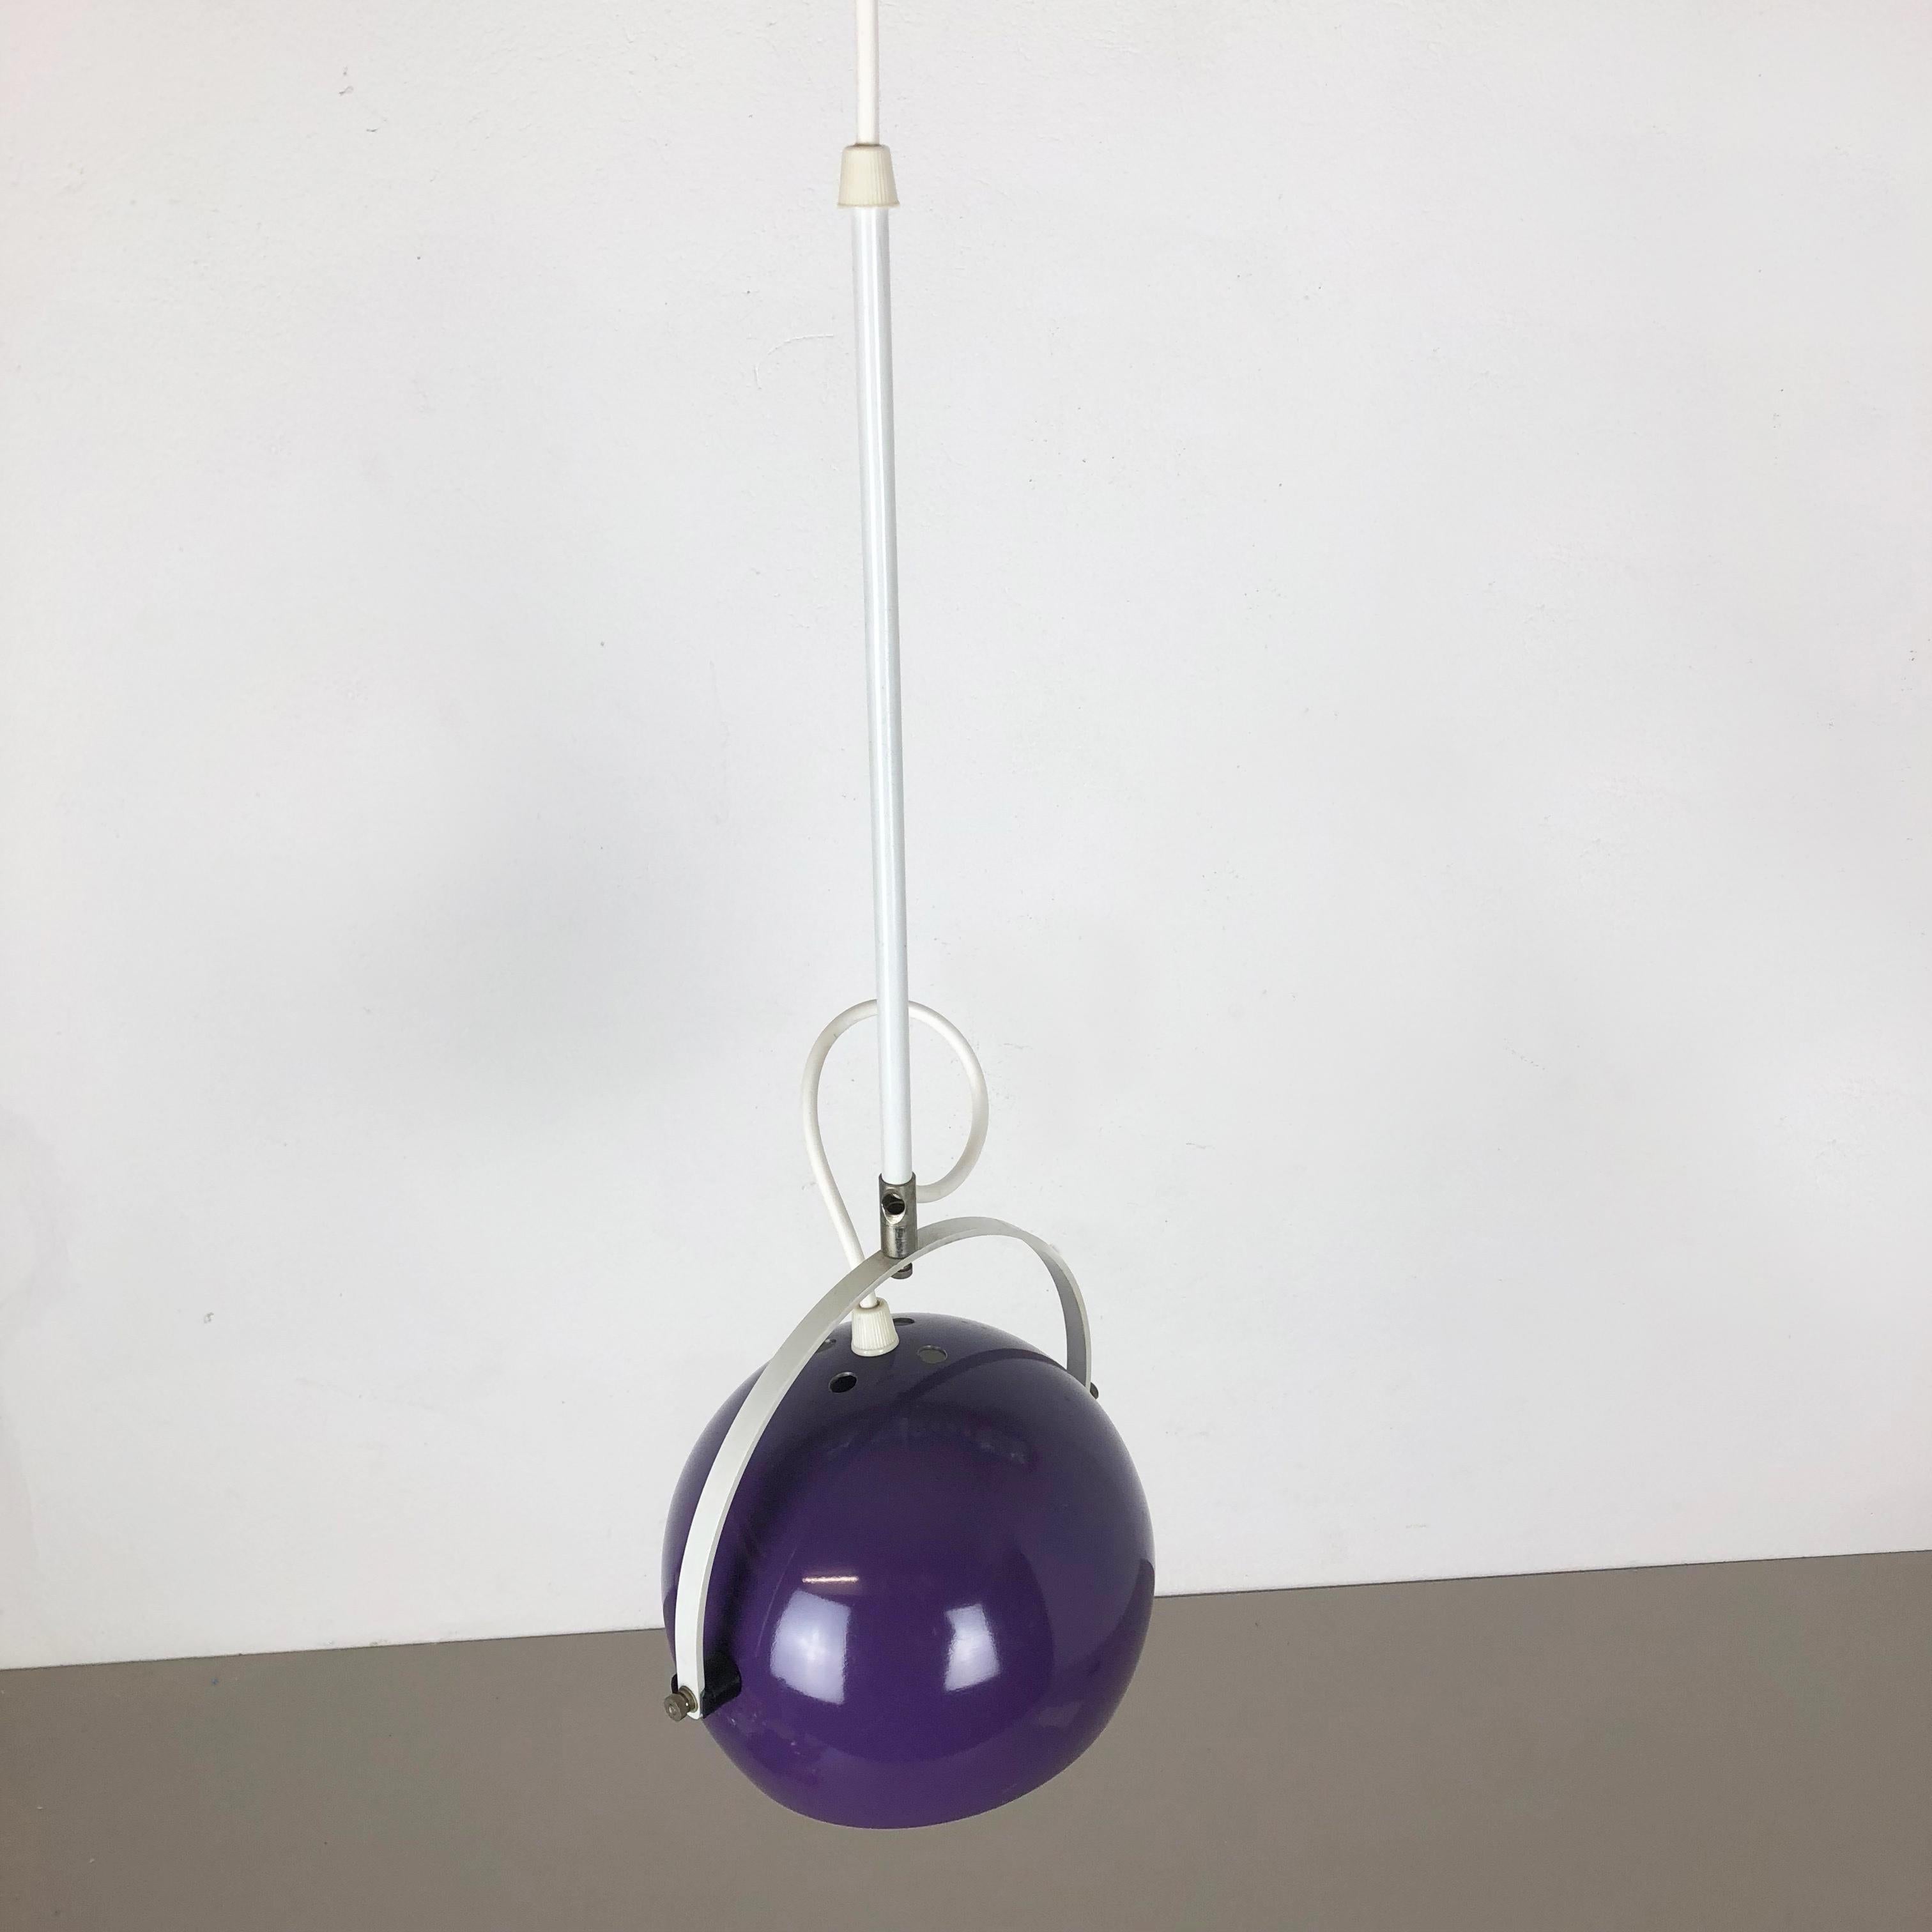 Adjustable Pop Art Panton Style Hanging Light with Purple Spot, Germany, 1970s For Sale 6